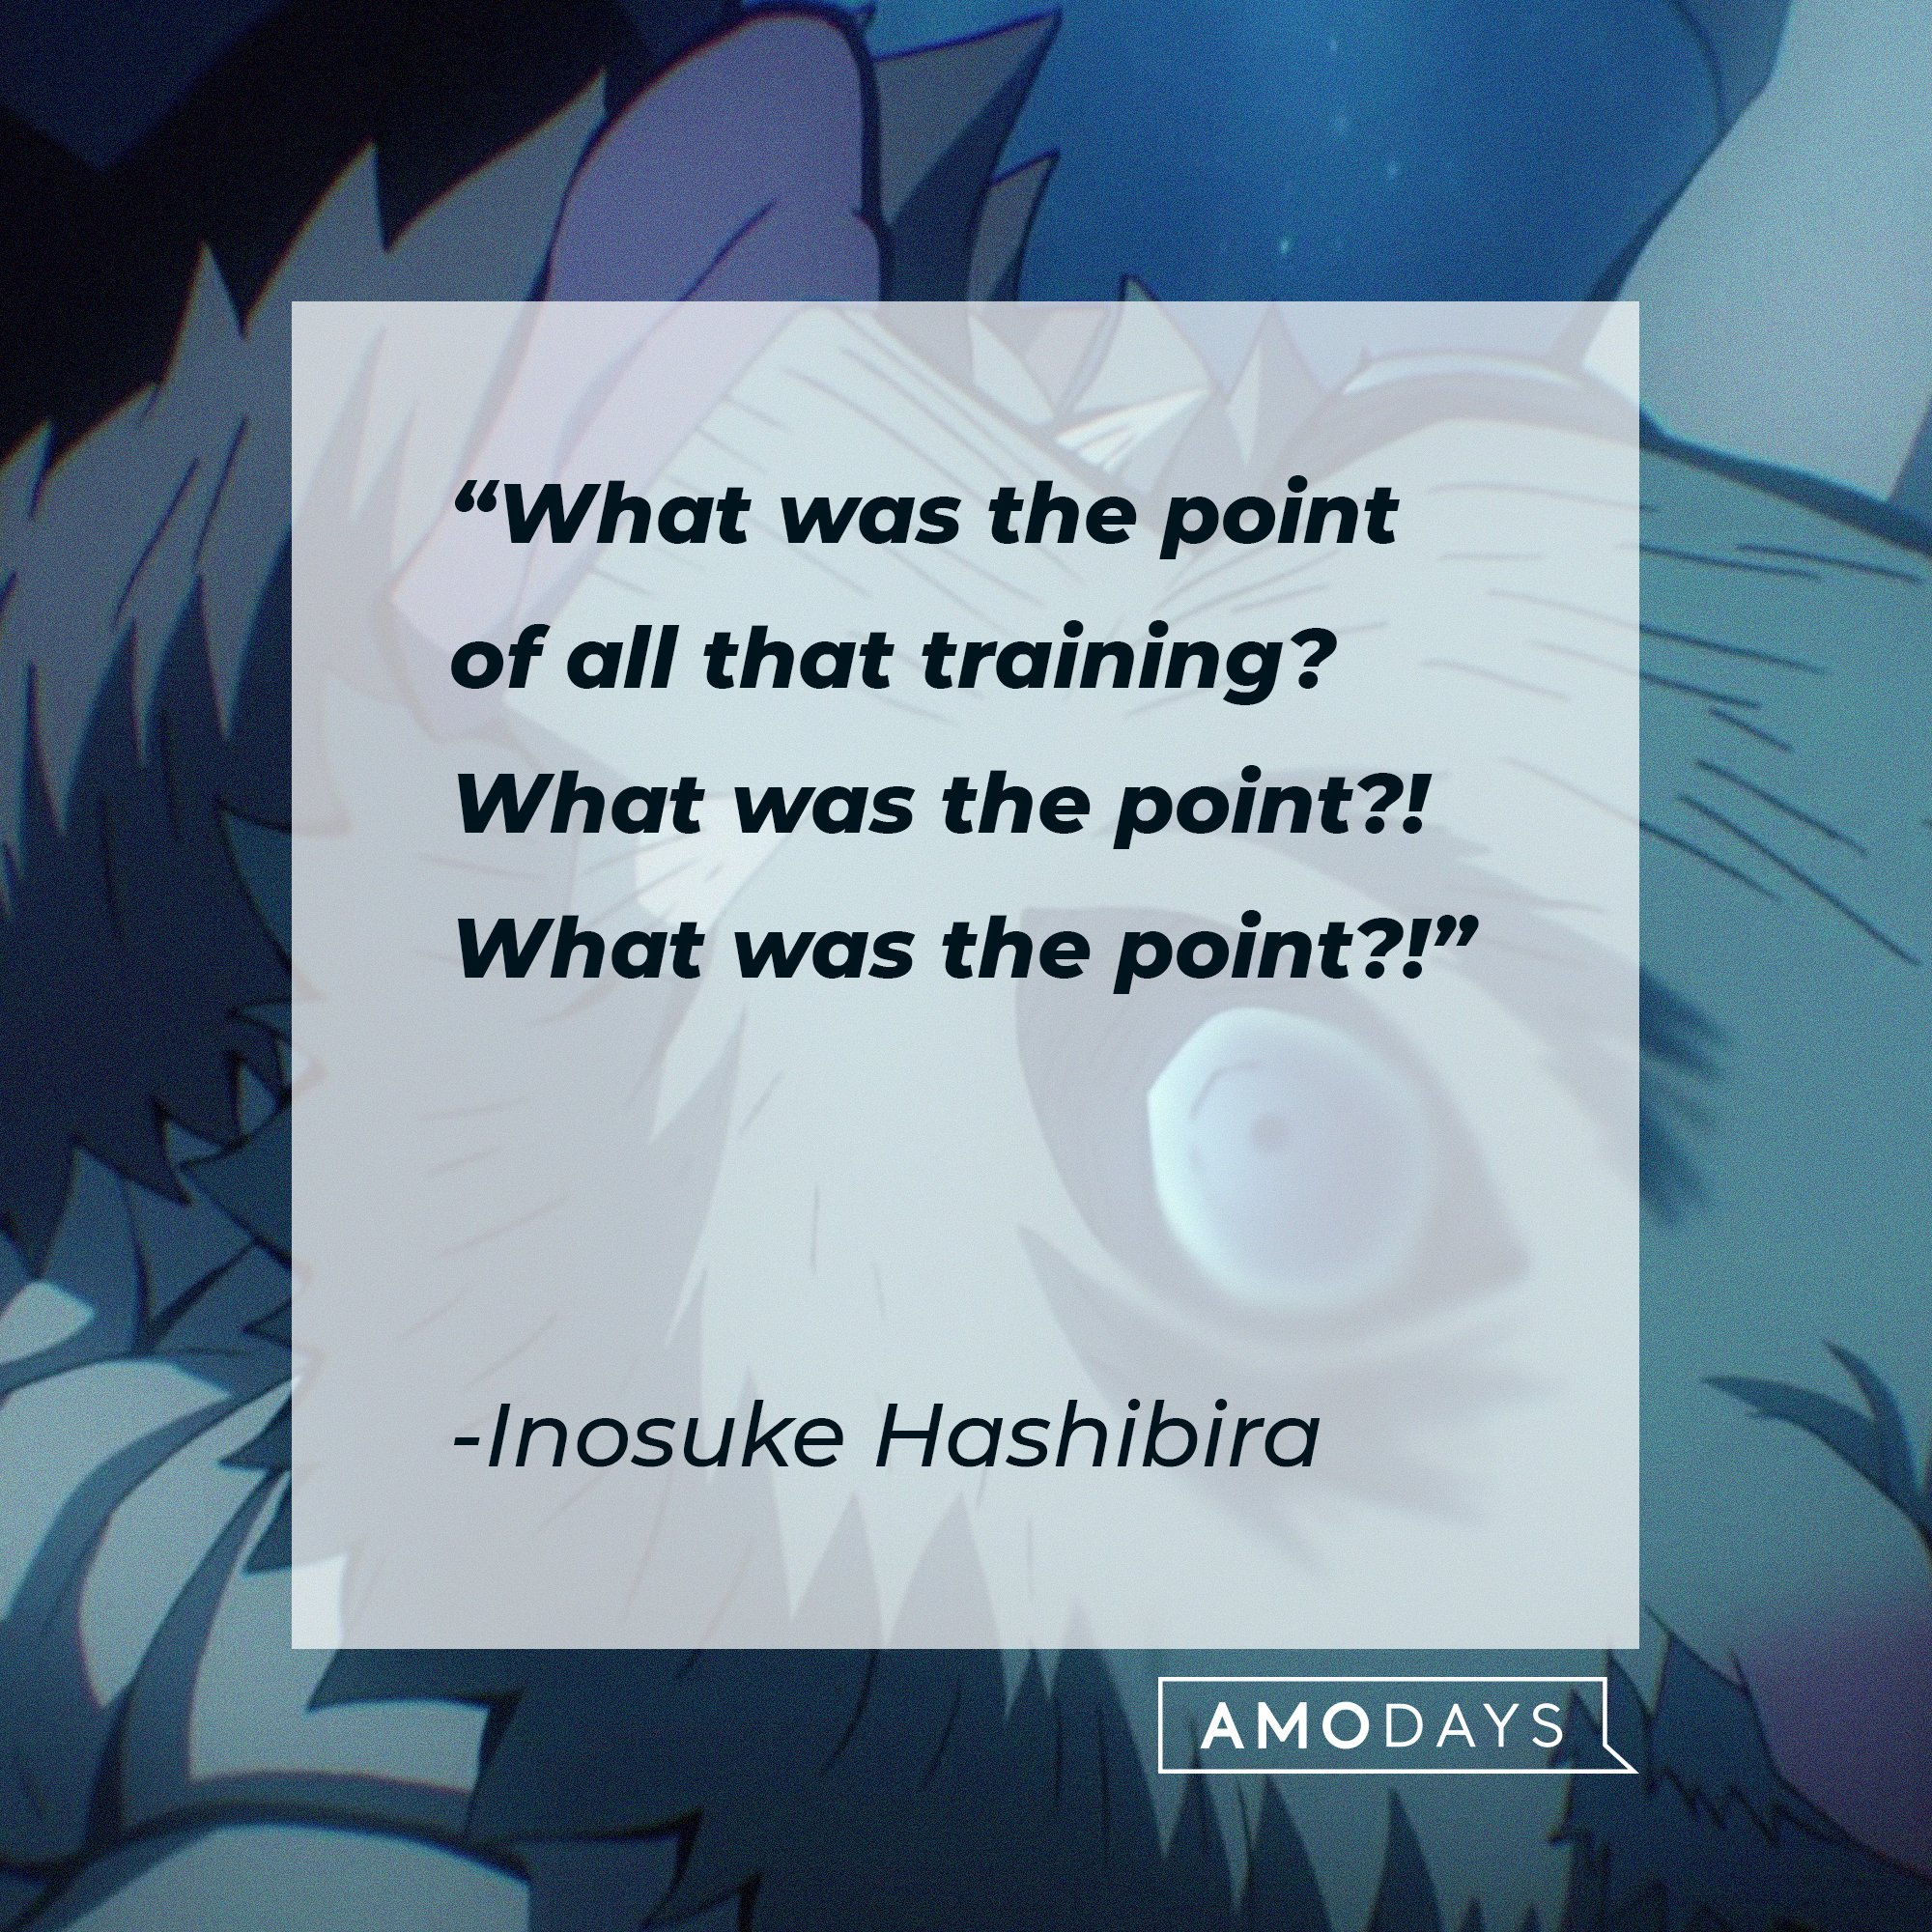  Inosuke Hashibira’s quote: "What was the point of all that training? What was the point?! What was the point?!" | Image: AmoDays